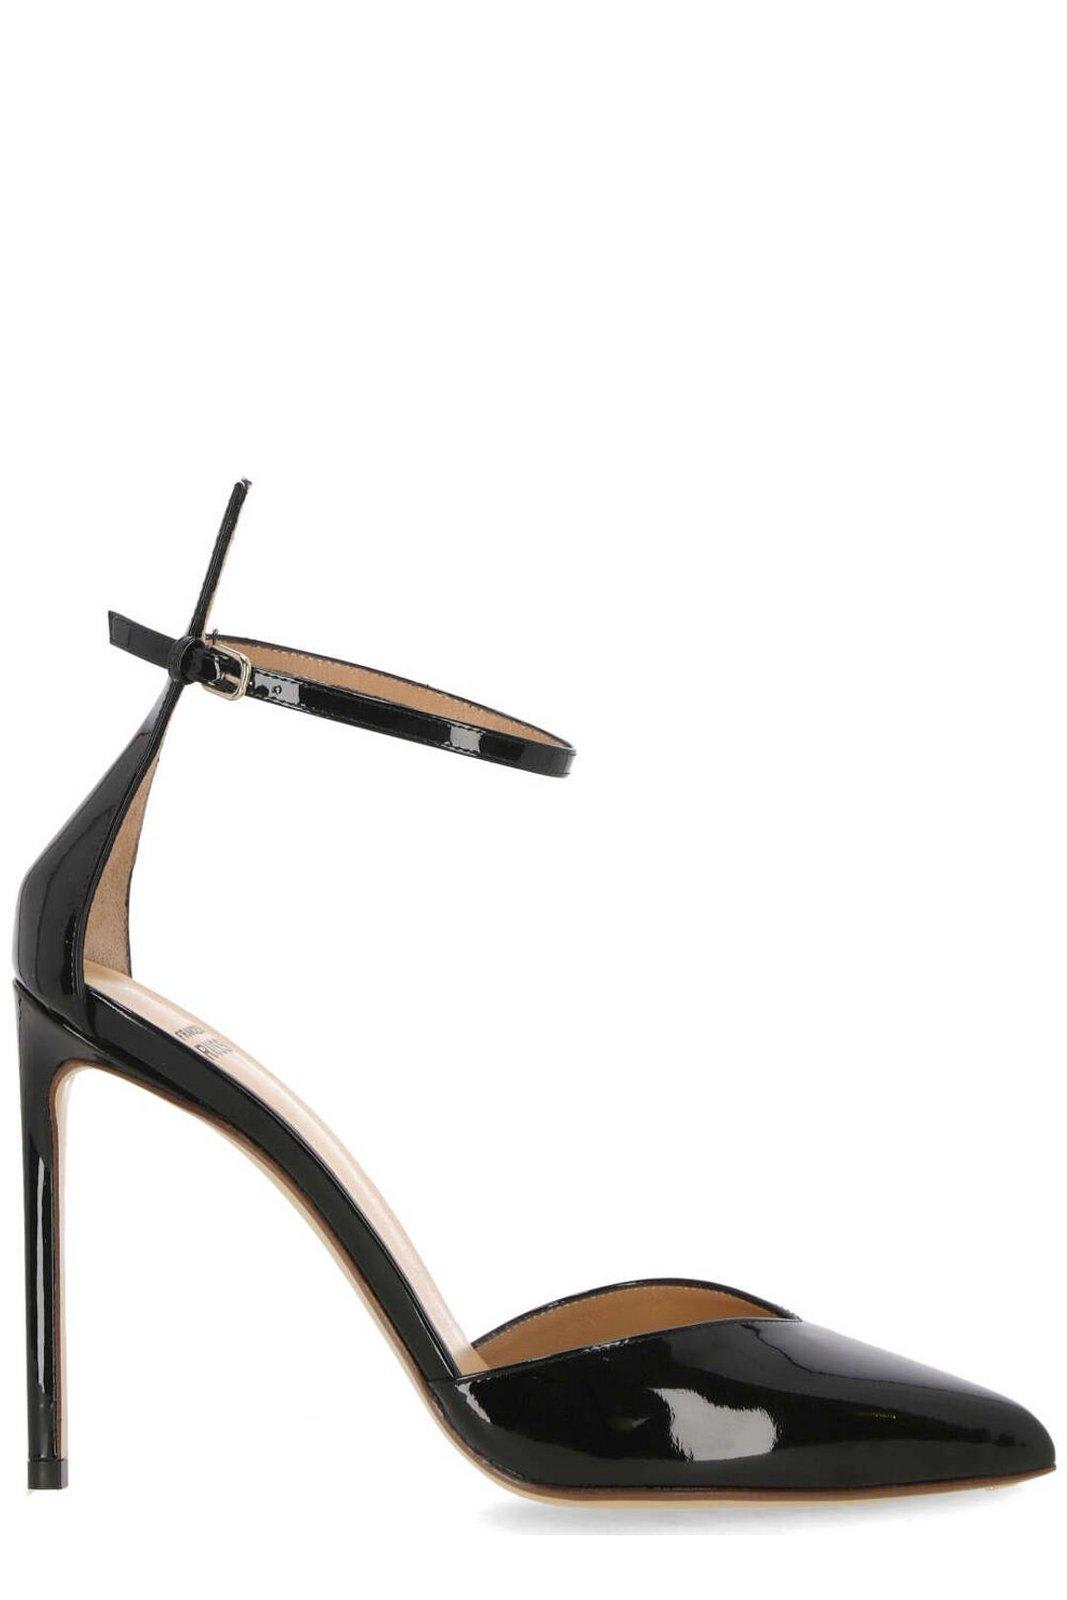 FRANCESCO RUSSO POINTED-TOE ANKLE STRAP PUMPS